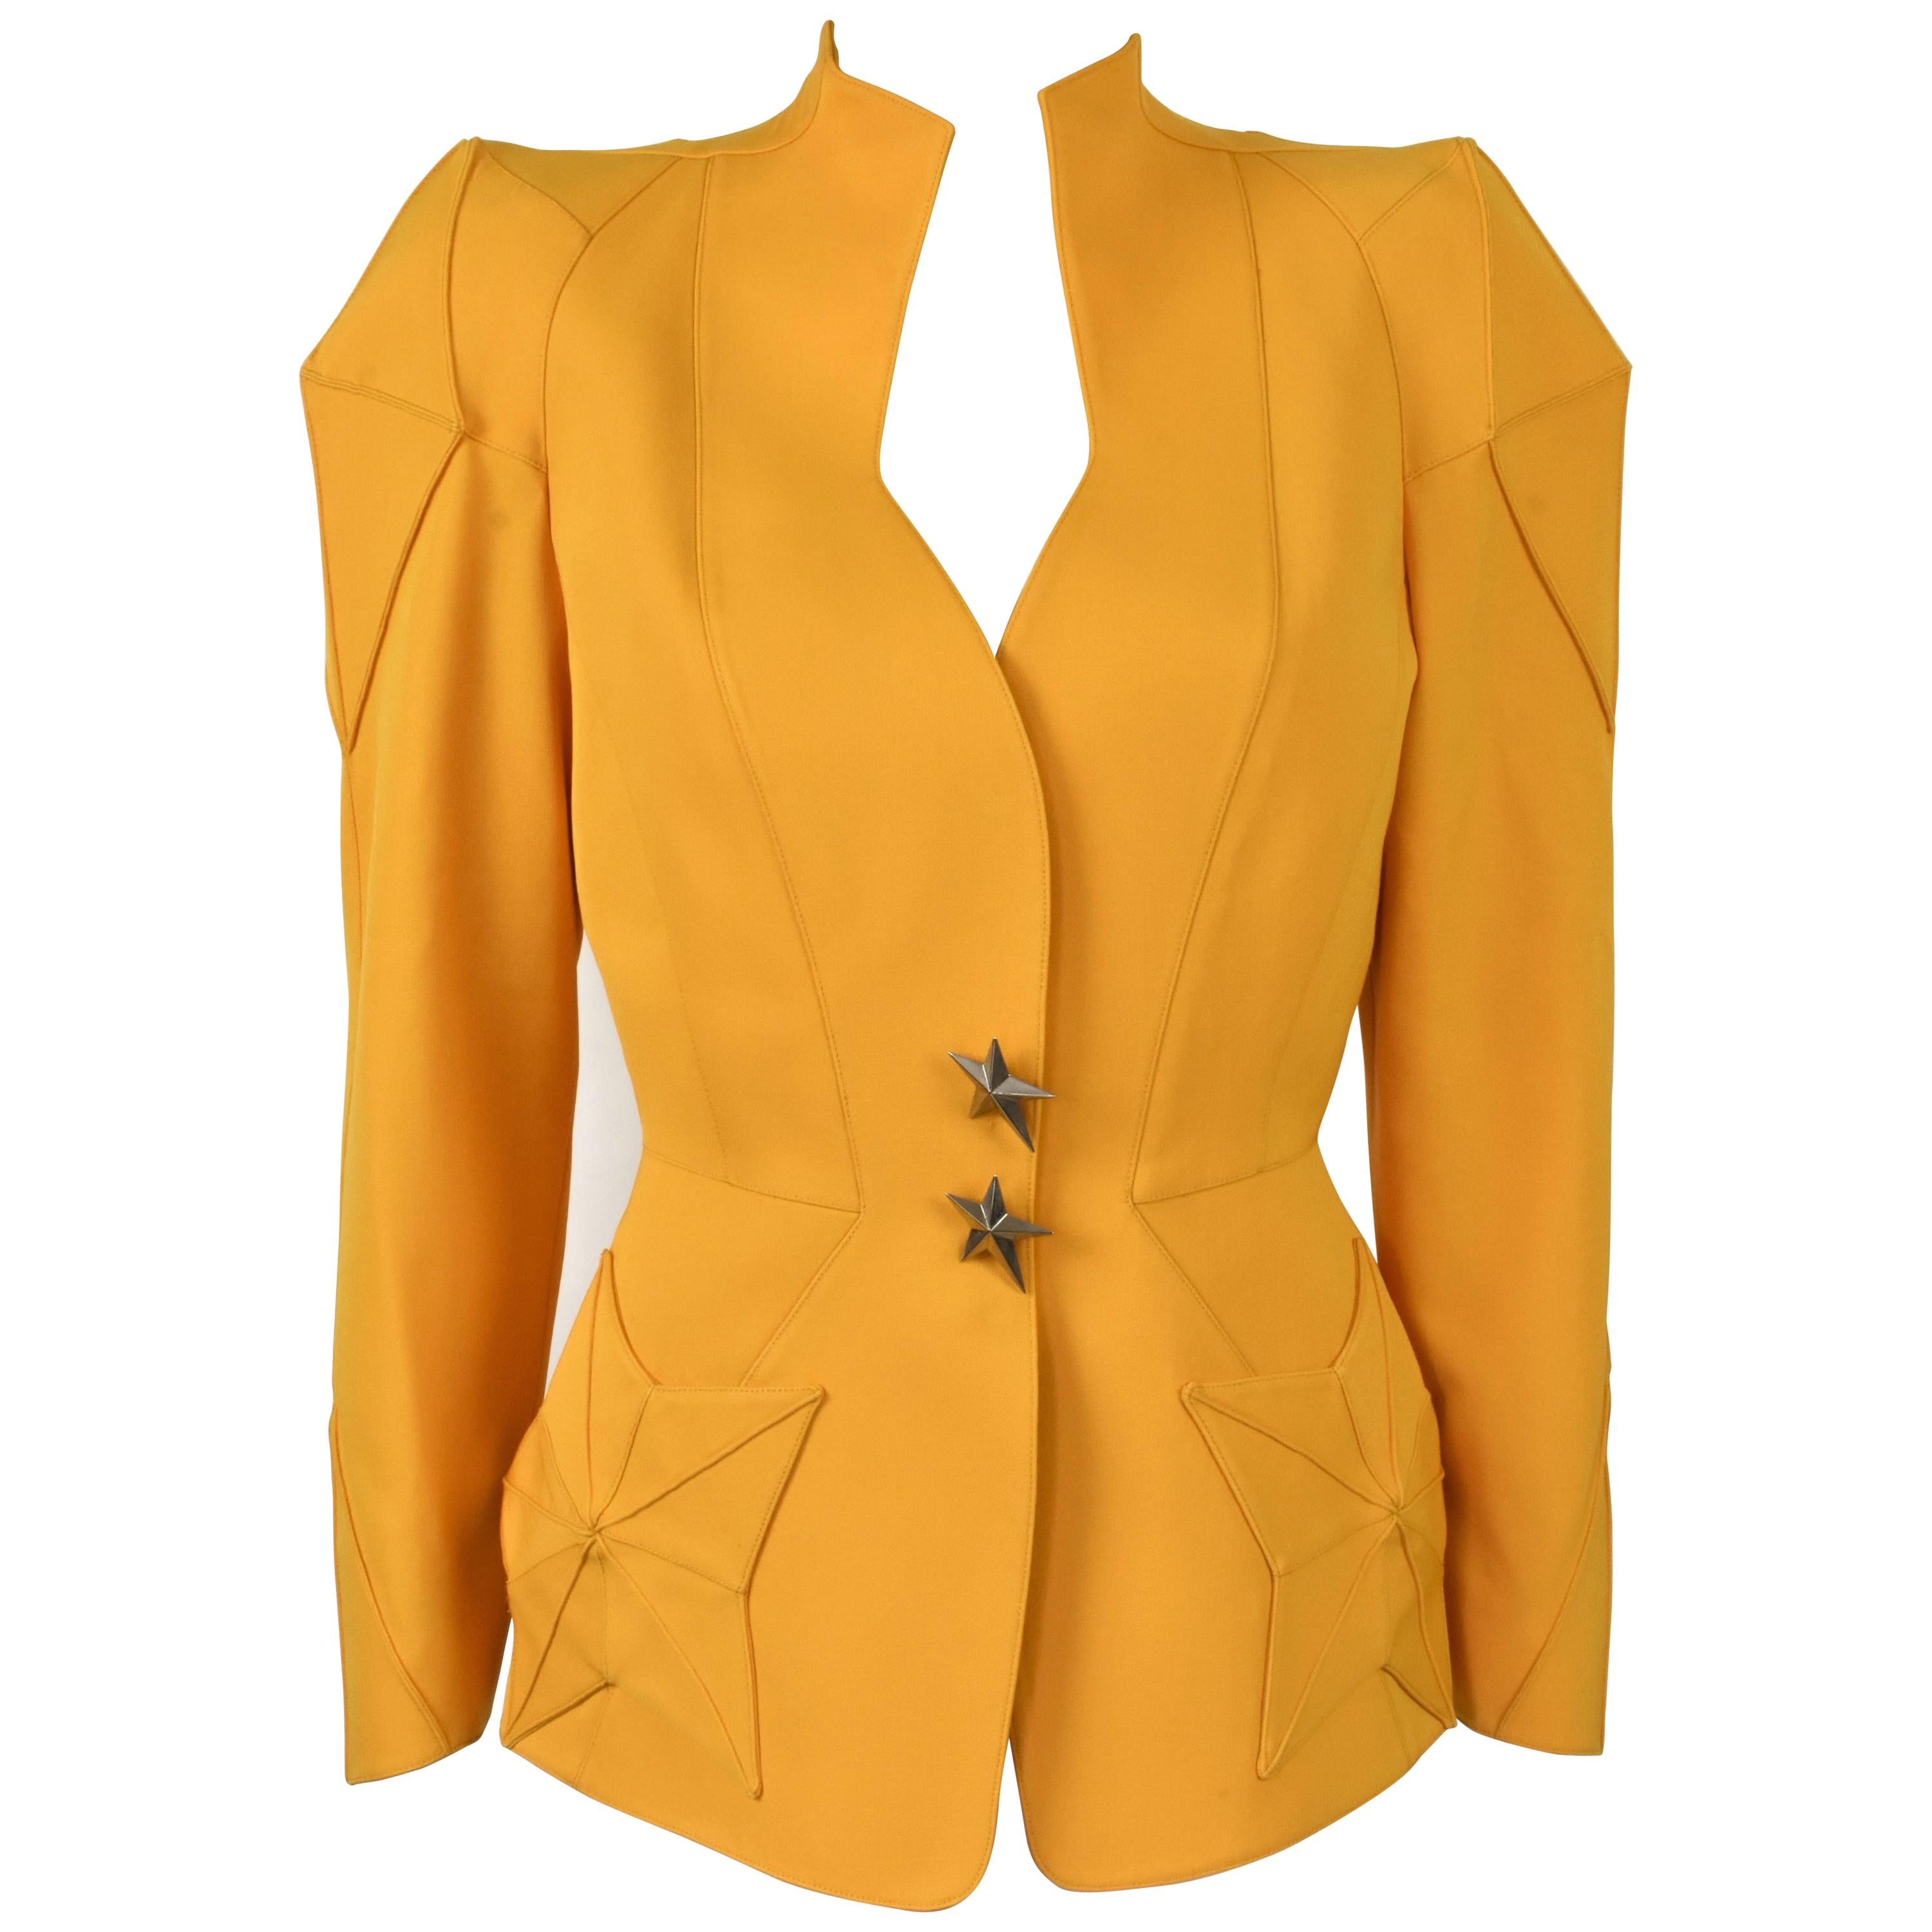 FINAL SALE 1980s Thierry Mugler Sculptural Yellow Blazer with Star Pockets For Sale